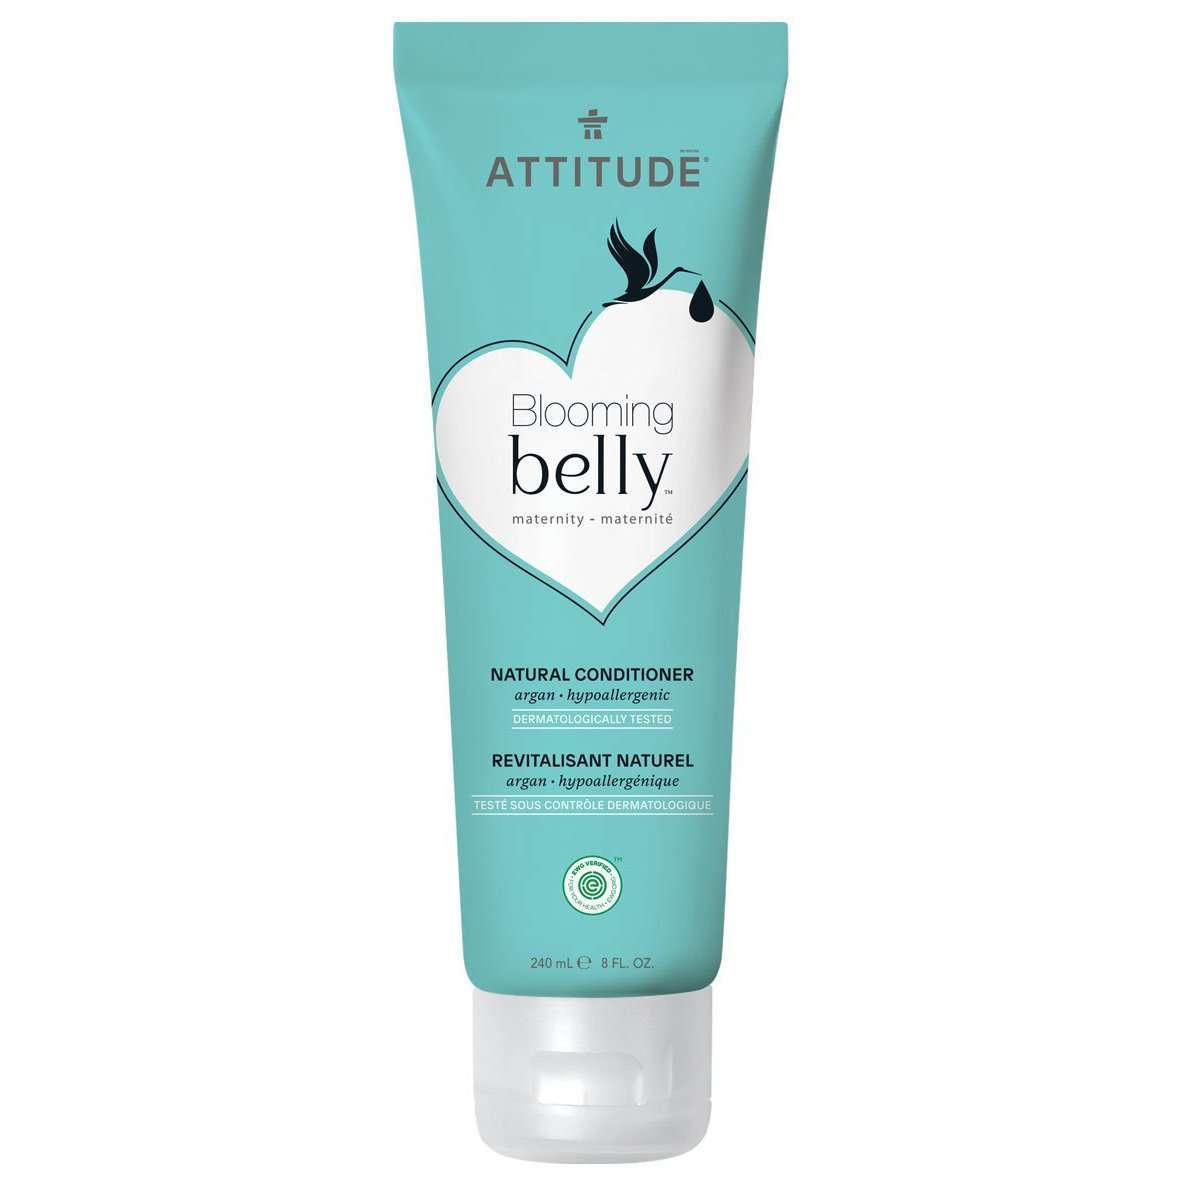 ATTITUDE® Blooming Belly Maternity Conditioner at Socialite Beauty Canada